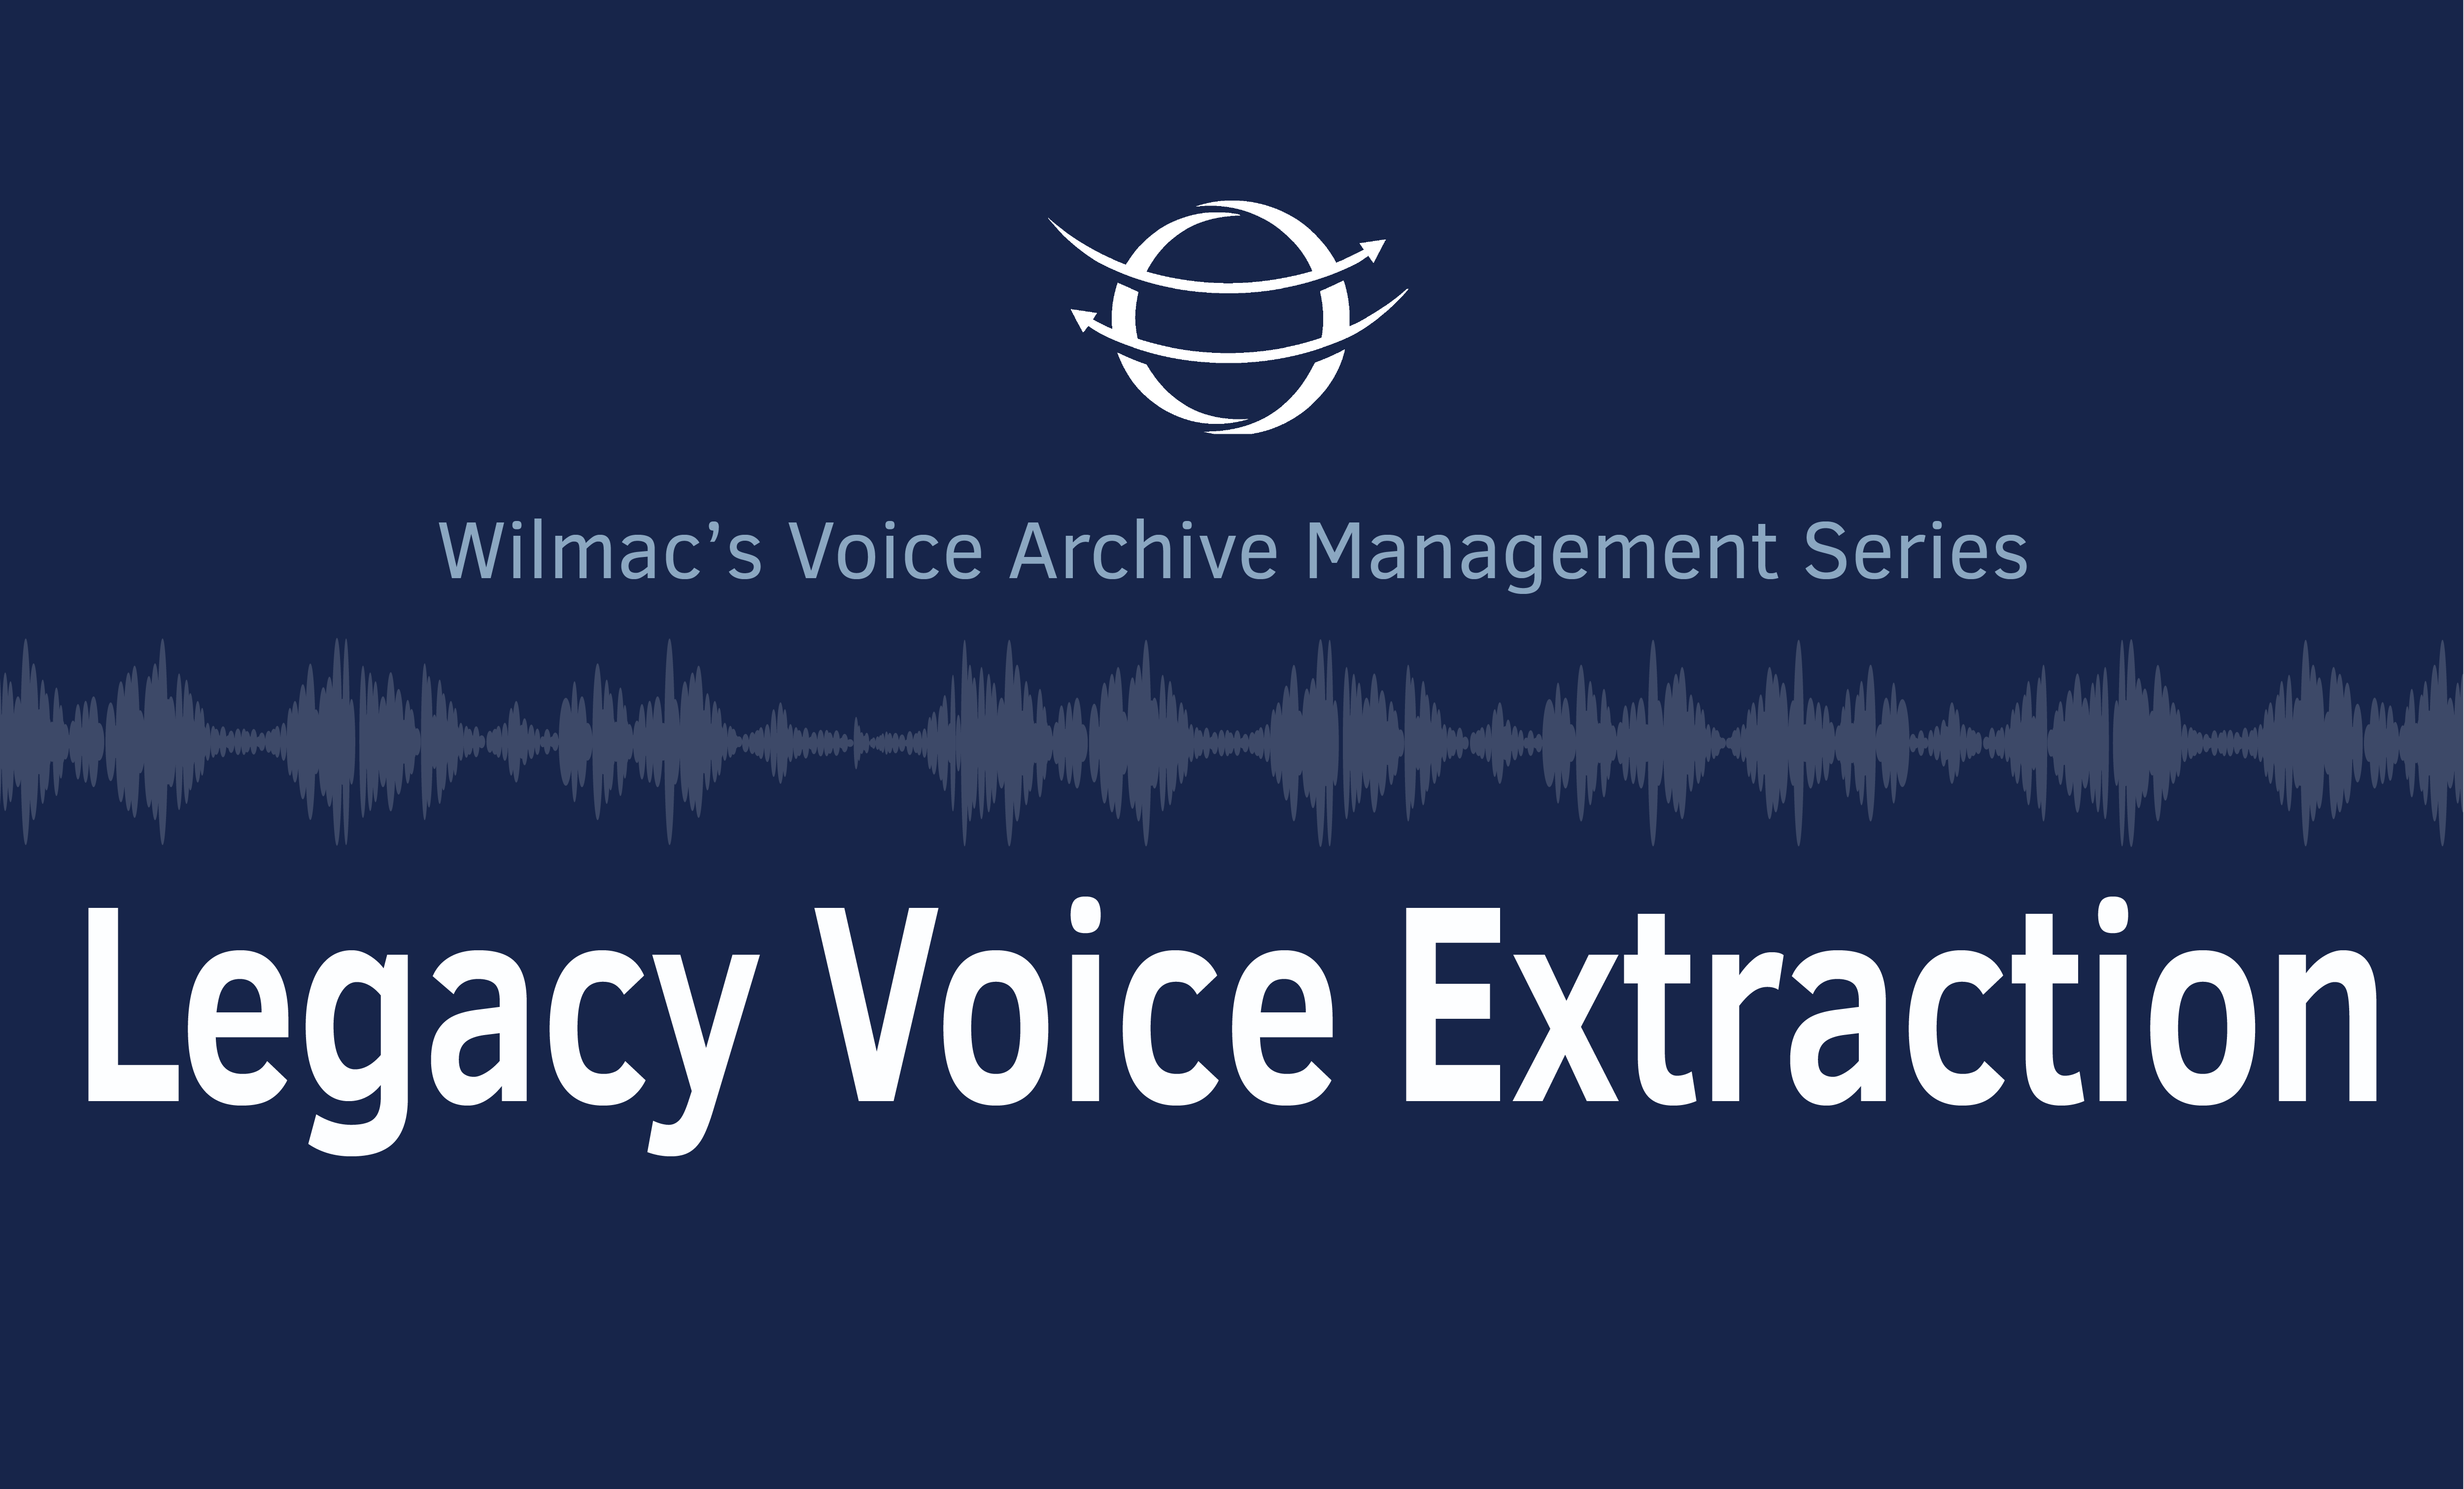 Wilmac’s Voice Archive Management Series: Legacy Voice Extraction